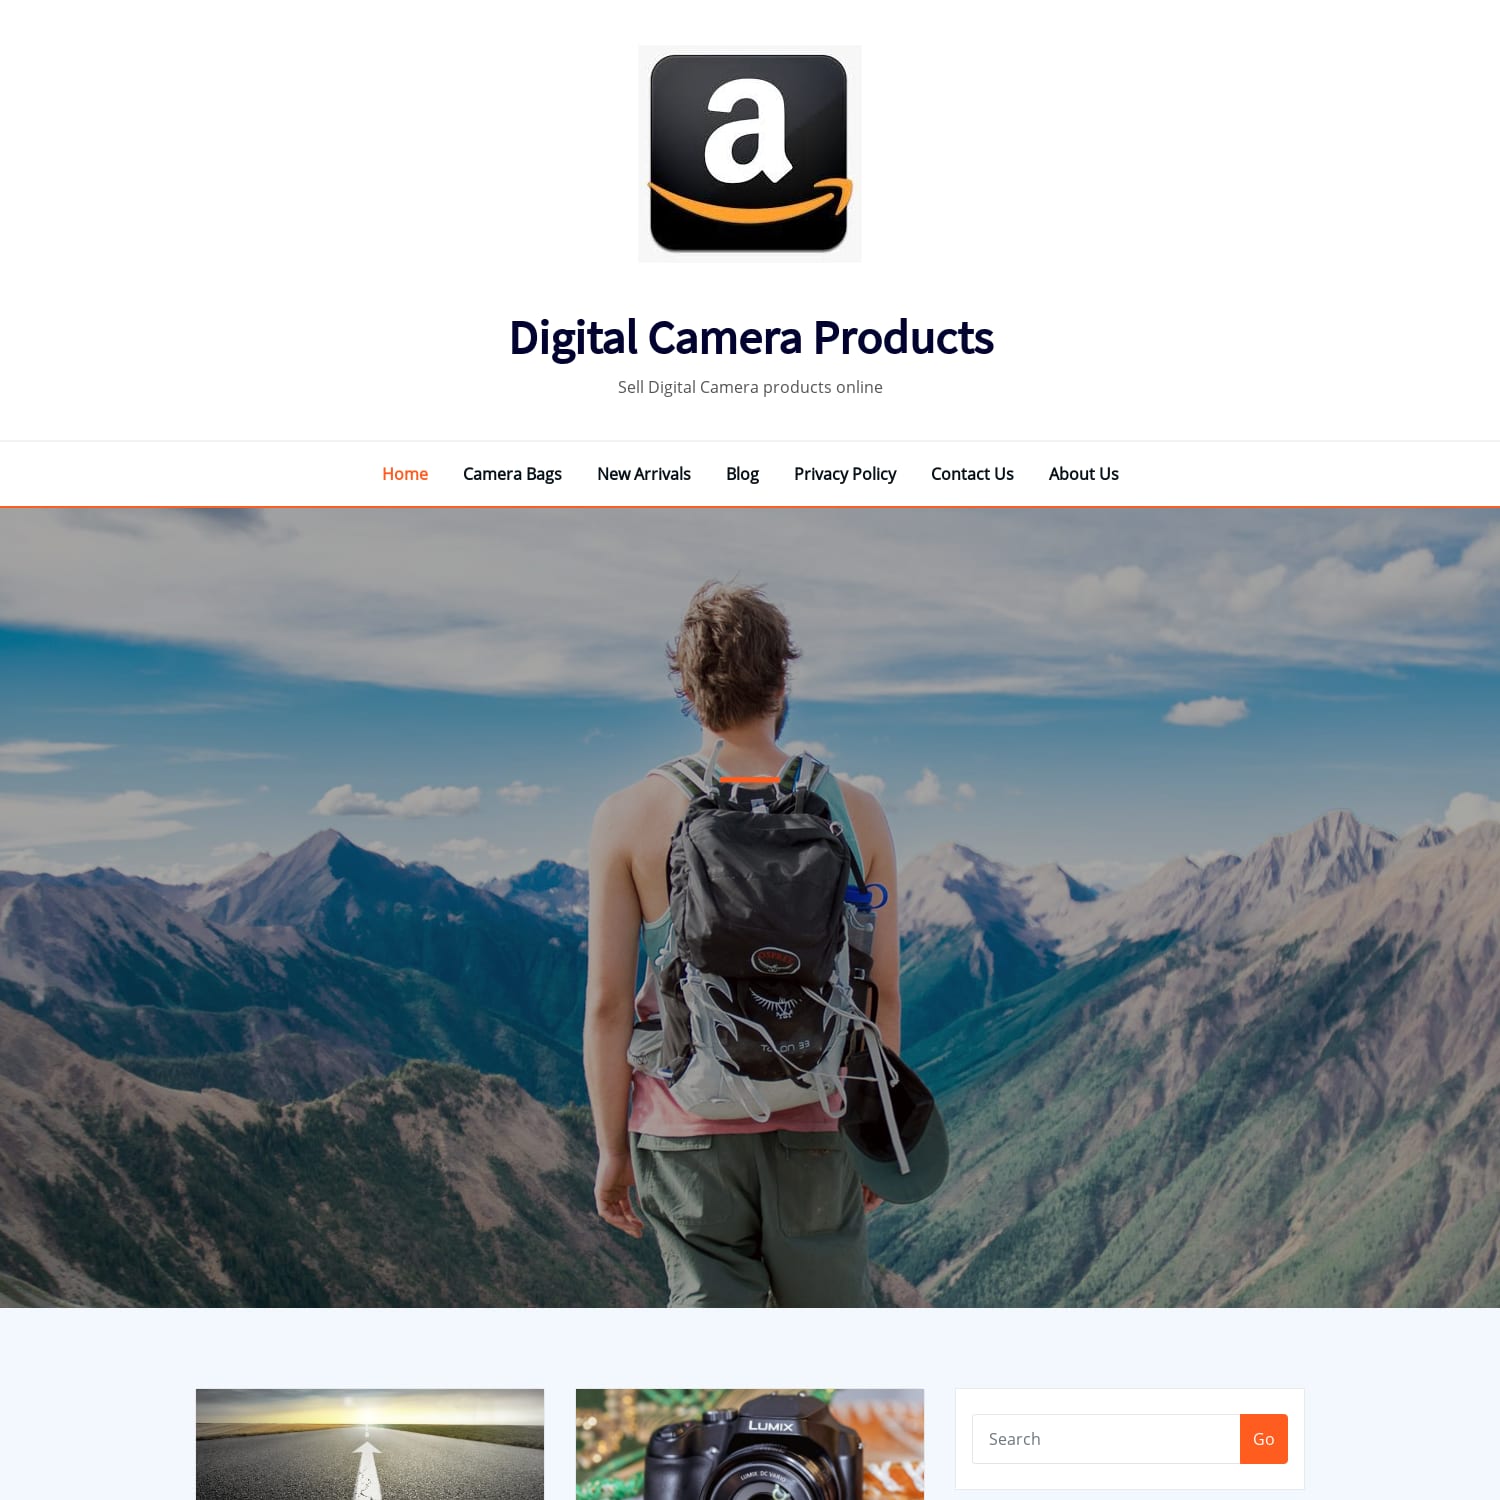 Digital Camera Products - Sell Digital Camera products online